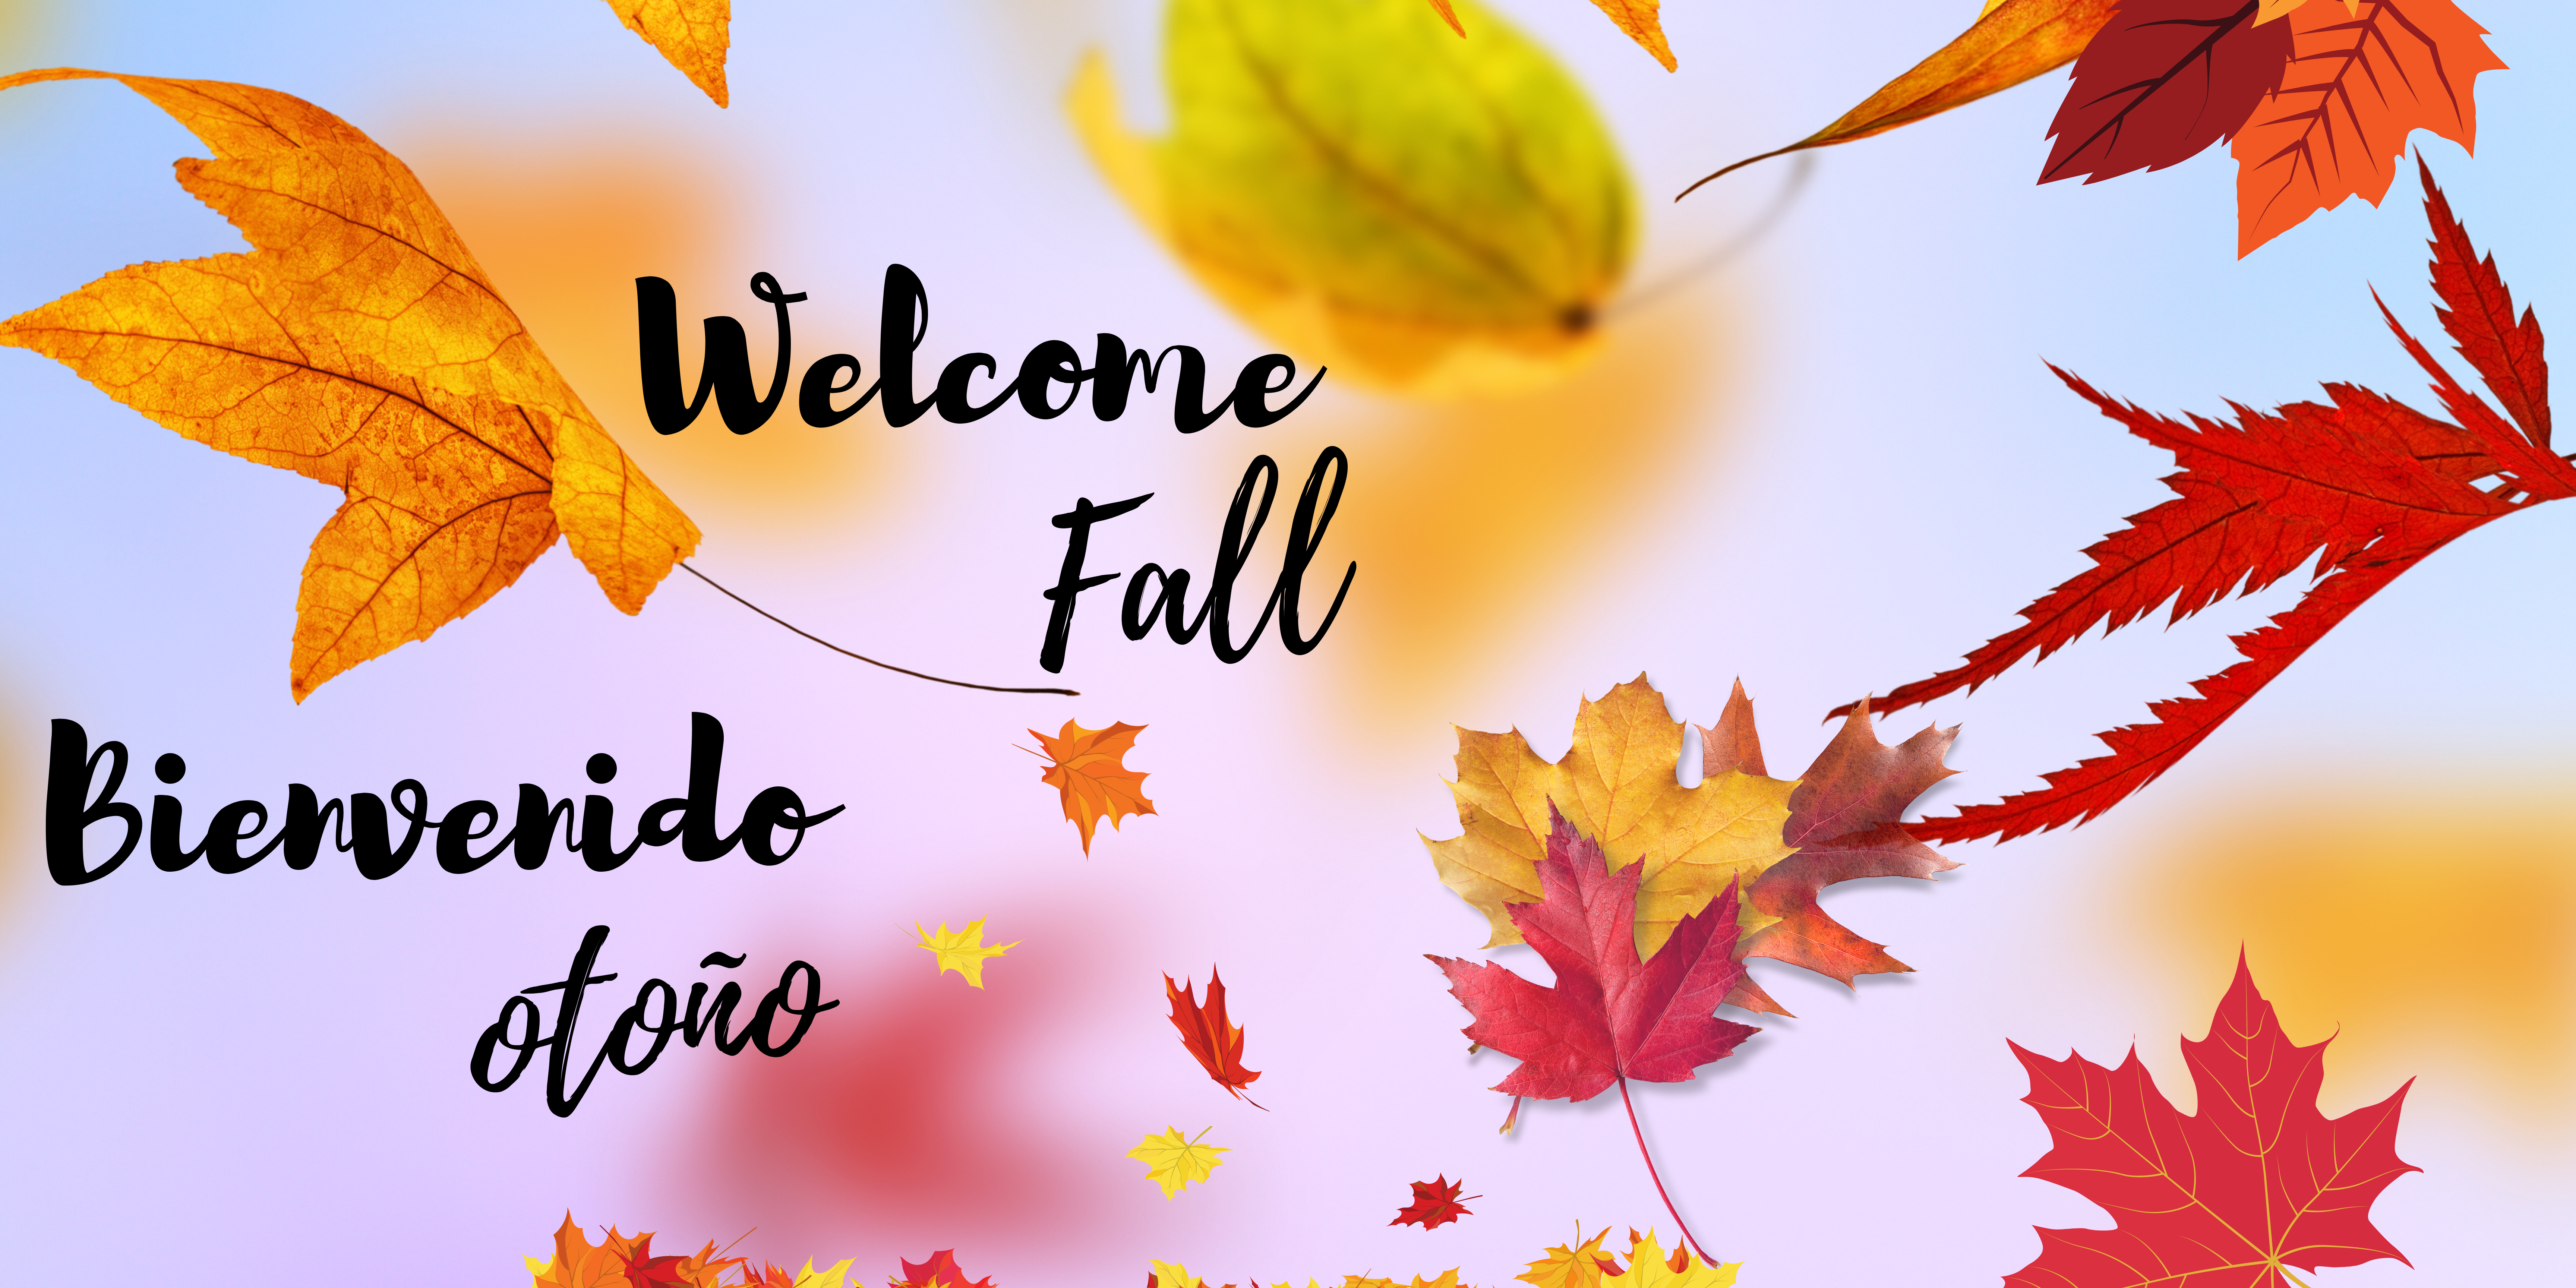 Text says, "Welcome Fall" and "Bienvenido otoño" over a background of colorful fall leaves.